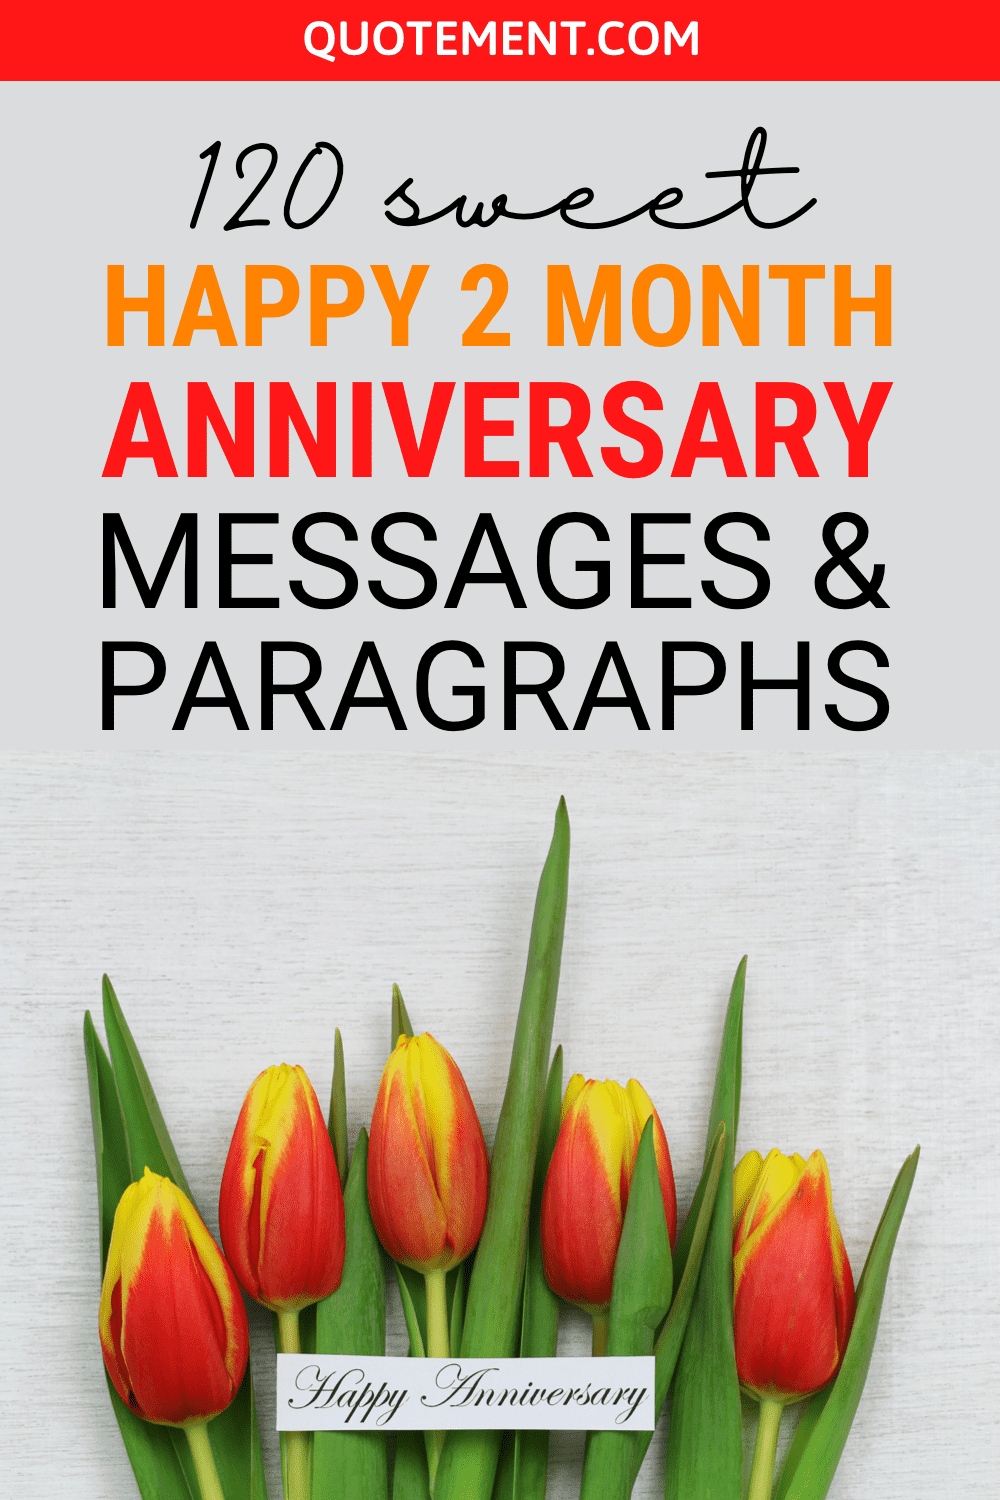 120 Sweet Happy 2 Month Anniversary Messages & Paragraphs 